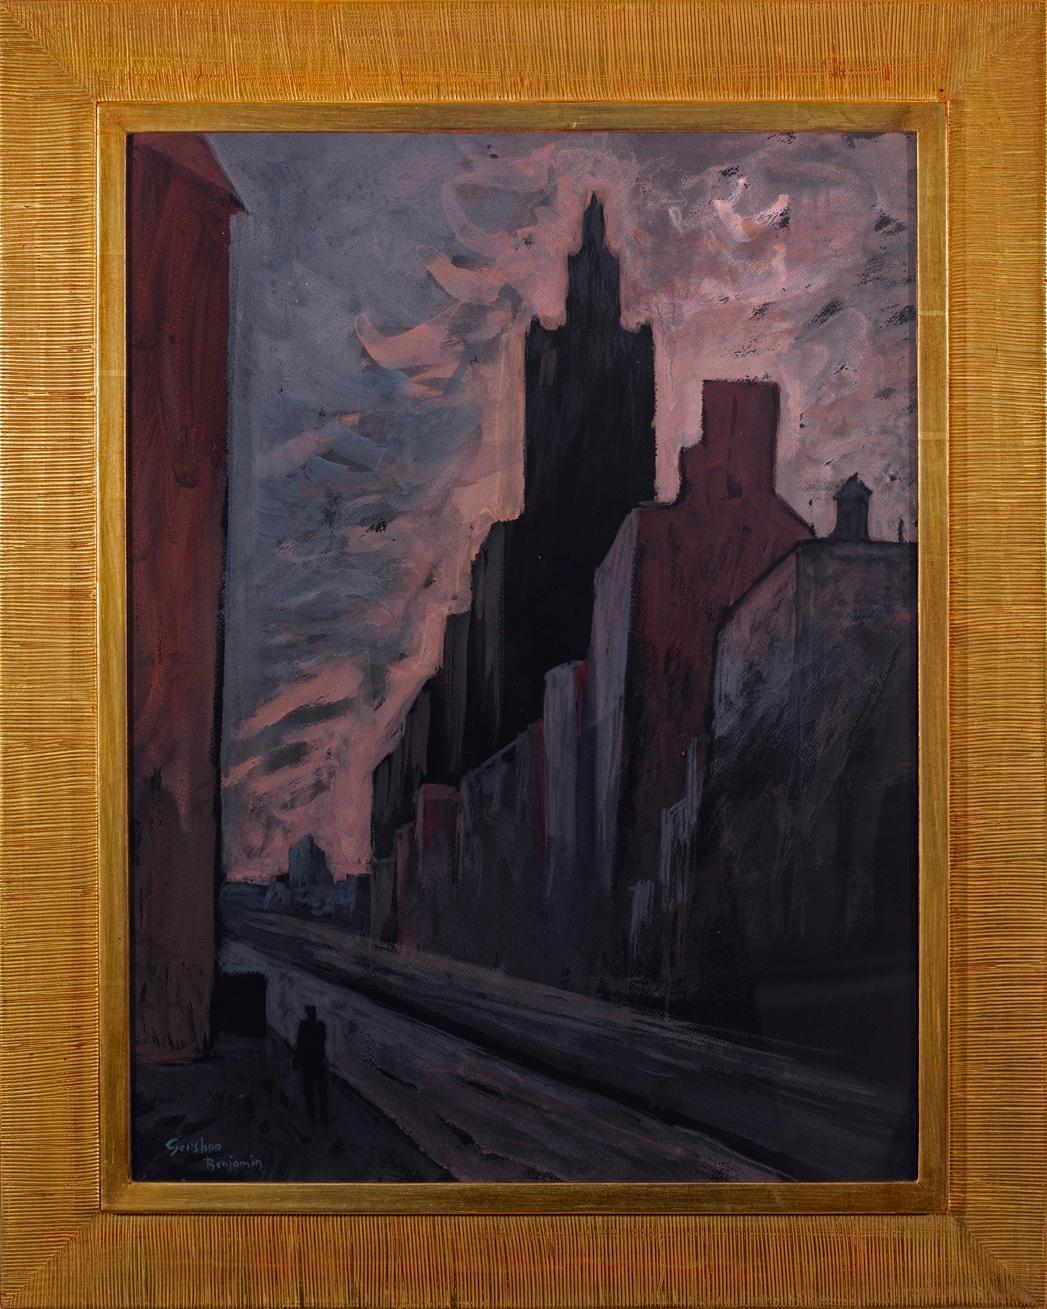 Gershon Benjamin Landscape Painting - "Sunset in the City"